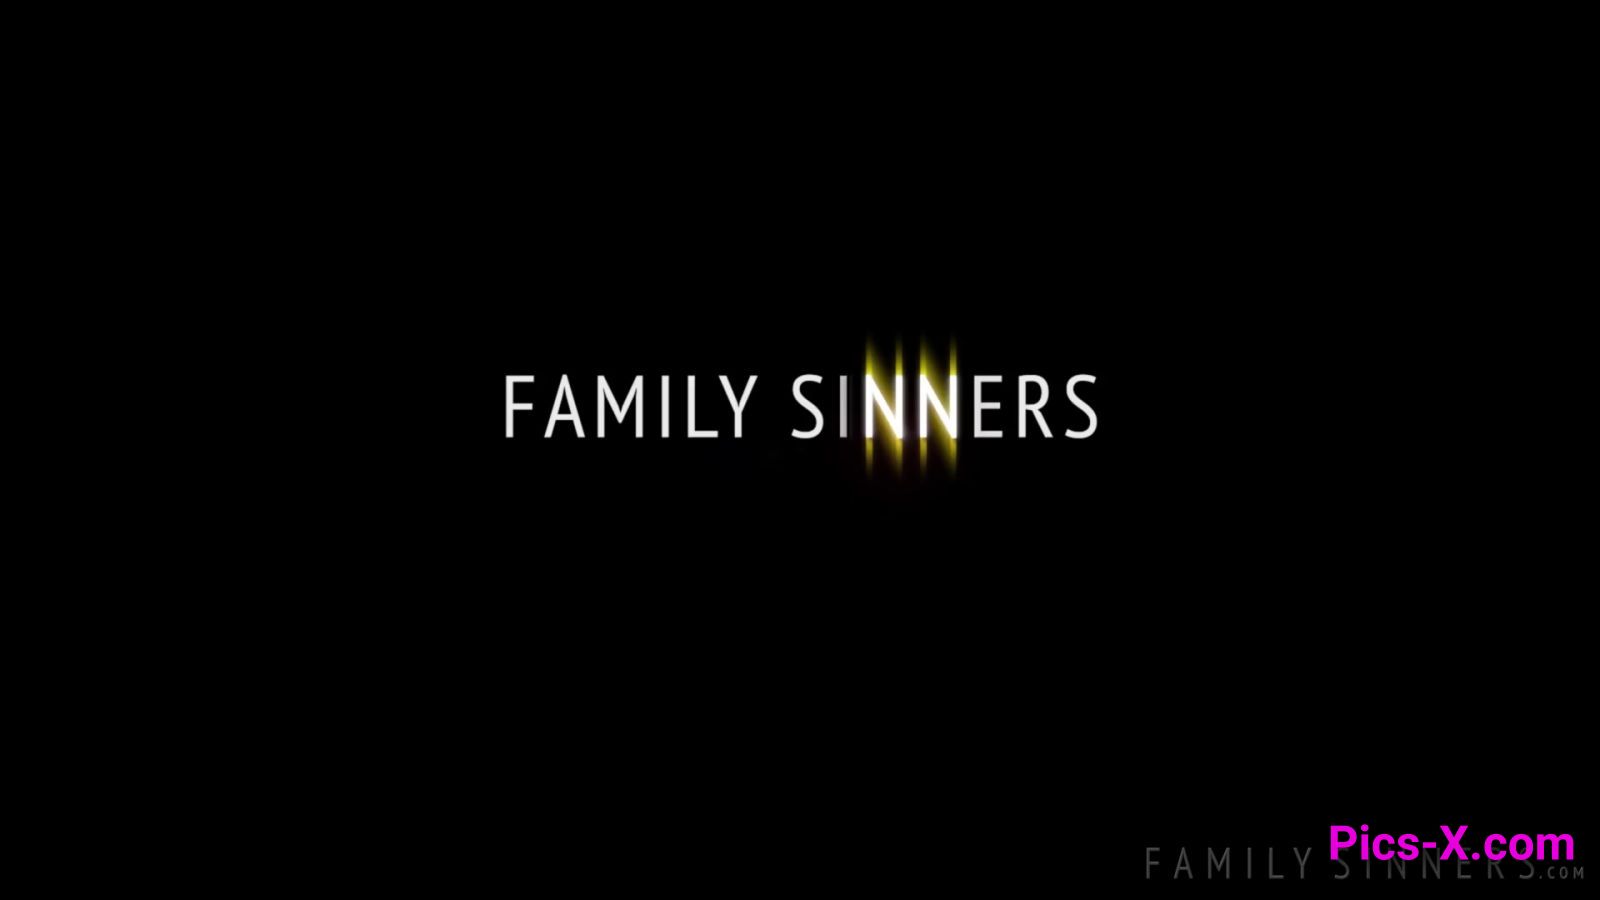 Family Cheaters 2 Episode 2 - Family Sinners - Image 1